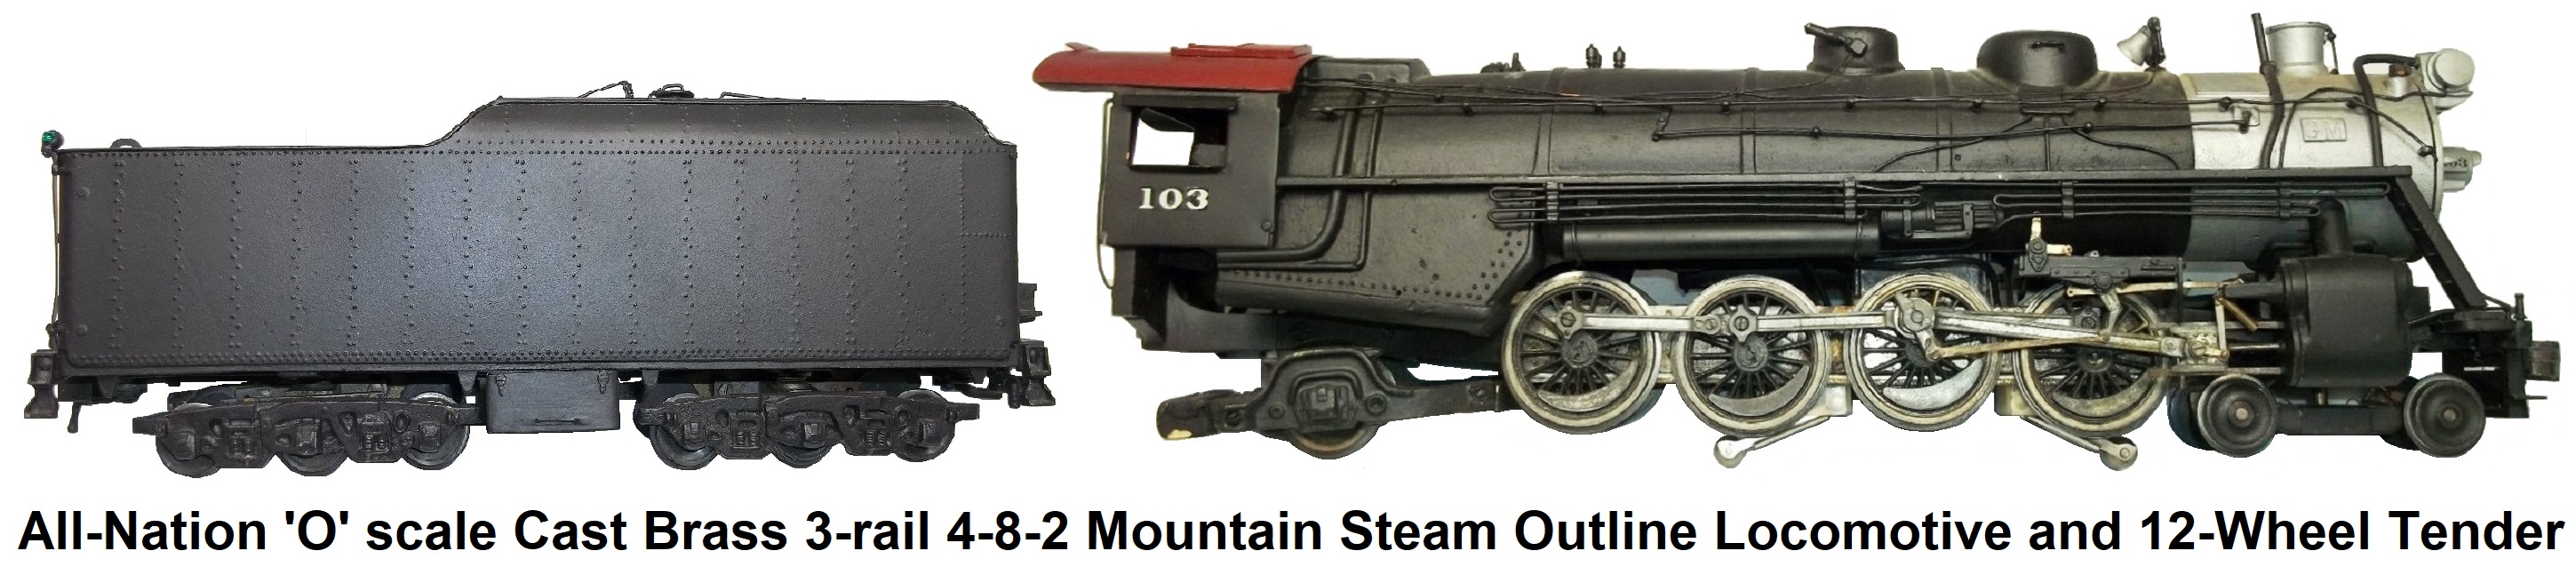 All-Nation 'O' scale 3-rail cast brass 4-8-2 Mountain Loco with 12-wheel tender